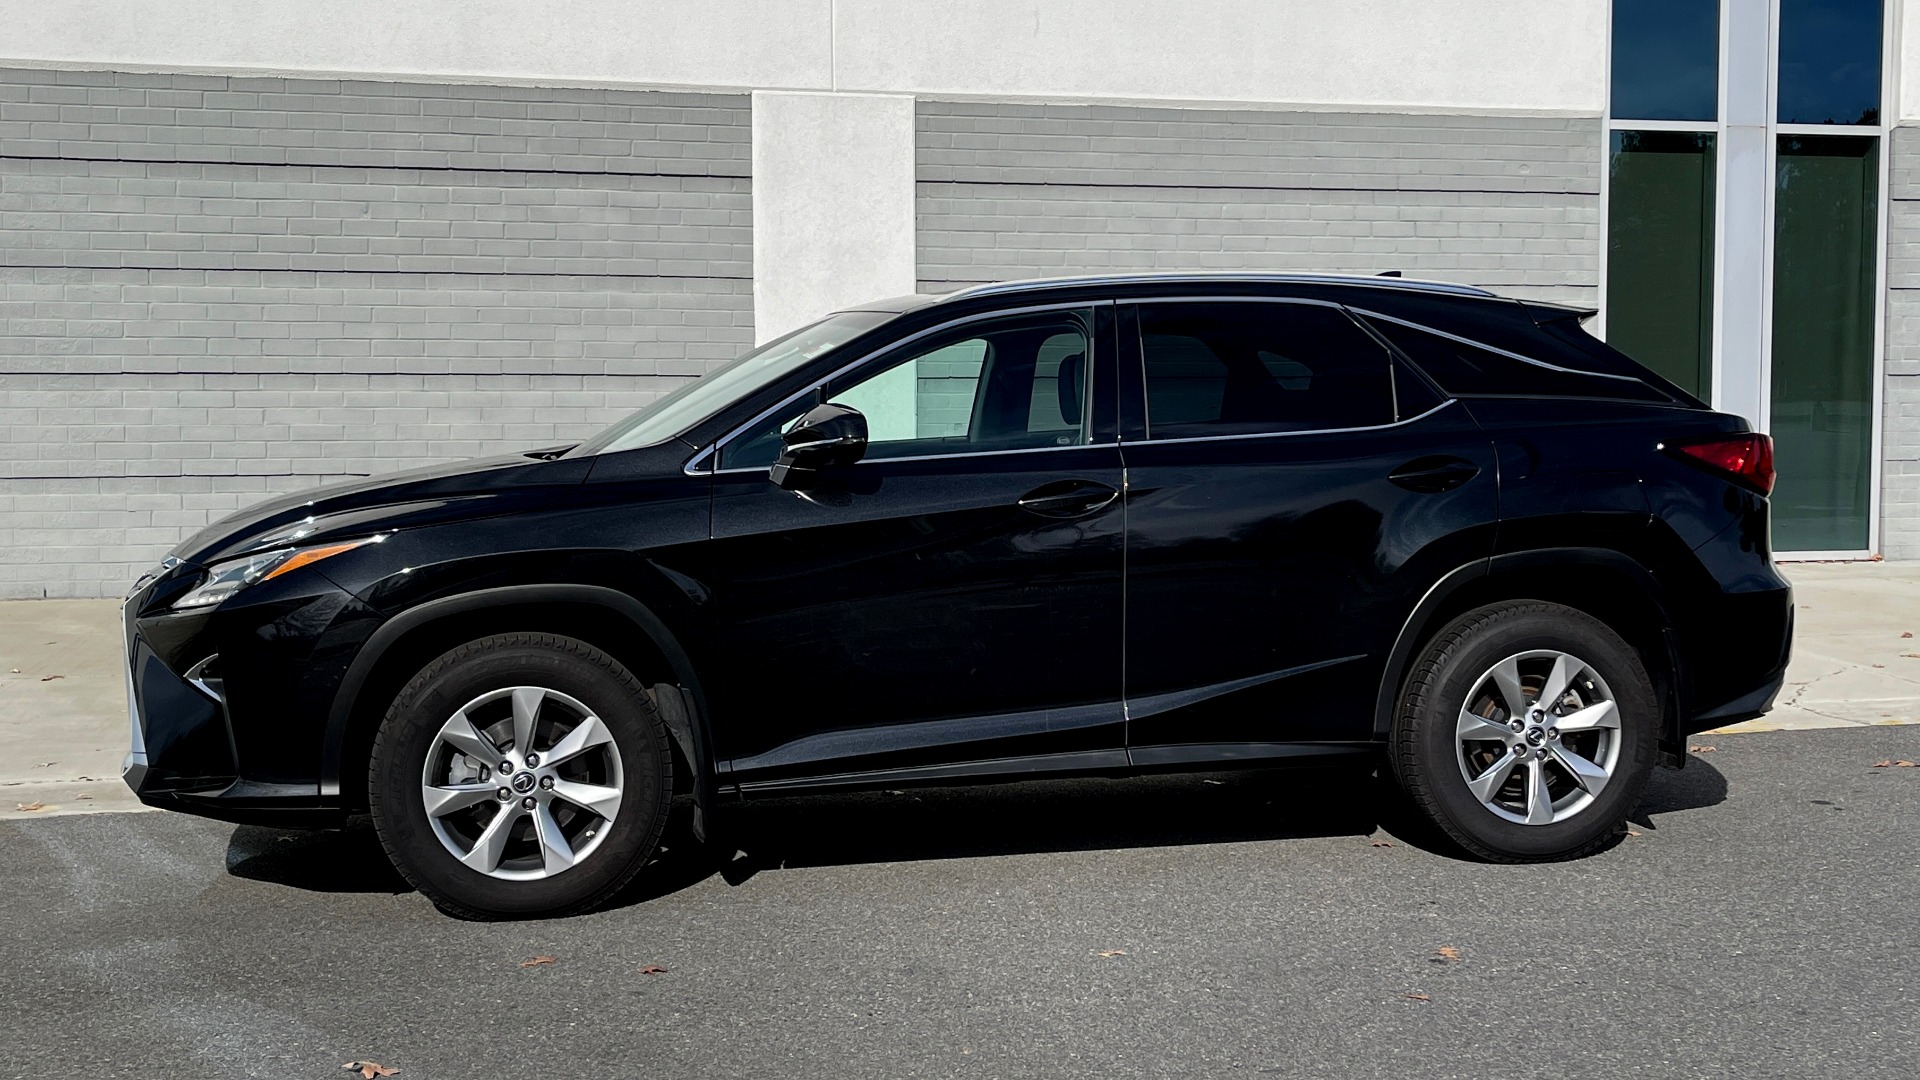 Used 2019 Lexus RX 350 3.5L SUV / AWD / SUNROOF / 18IN WHEELS / REARVIEW for sale Sold at Formula Imports in Charlotte NC 28227 3